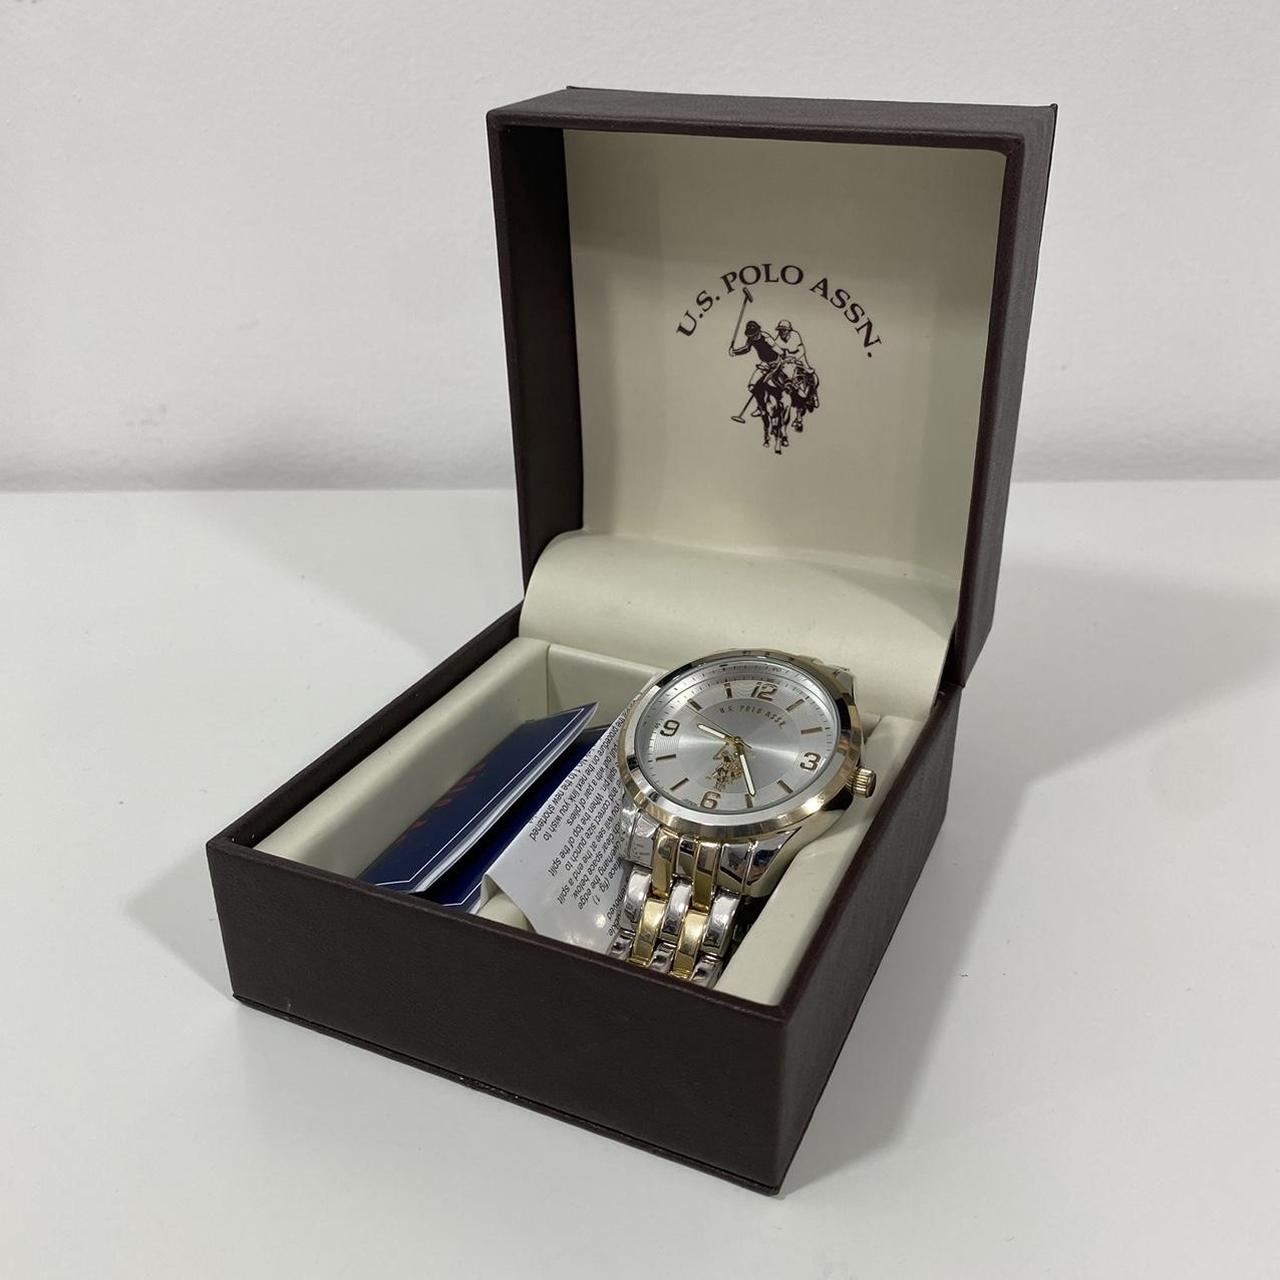 U.S. Polo Assn. Men's Silver and Gold Watch